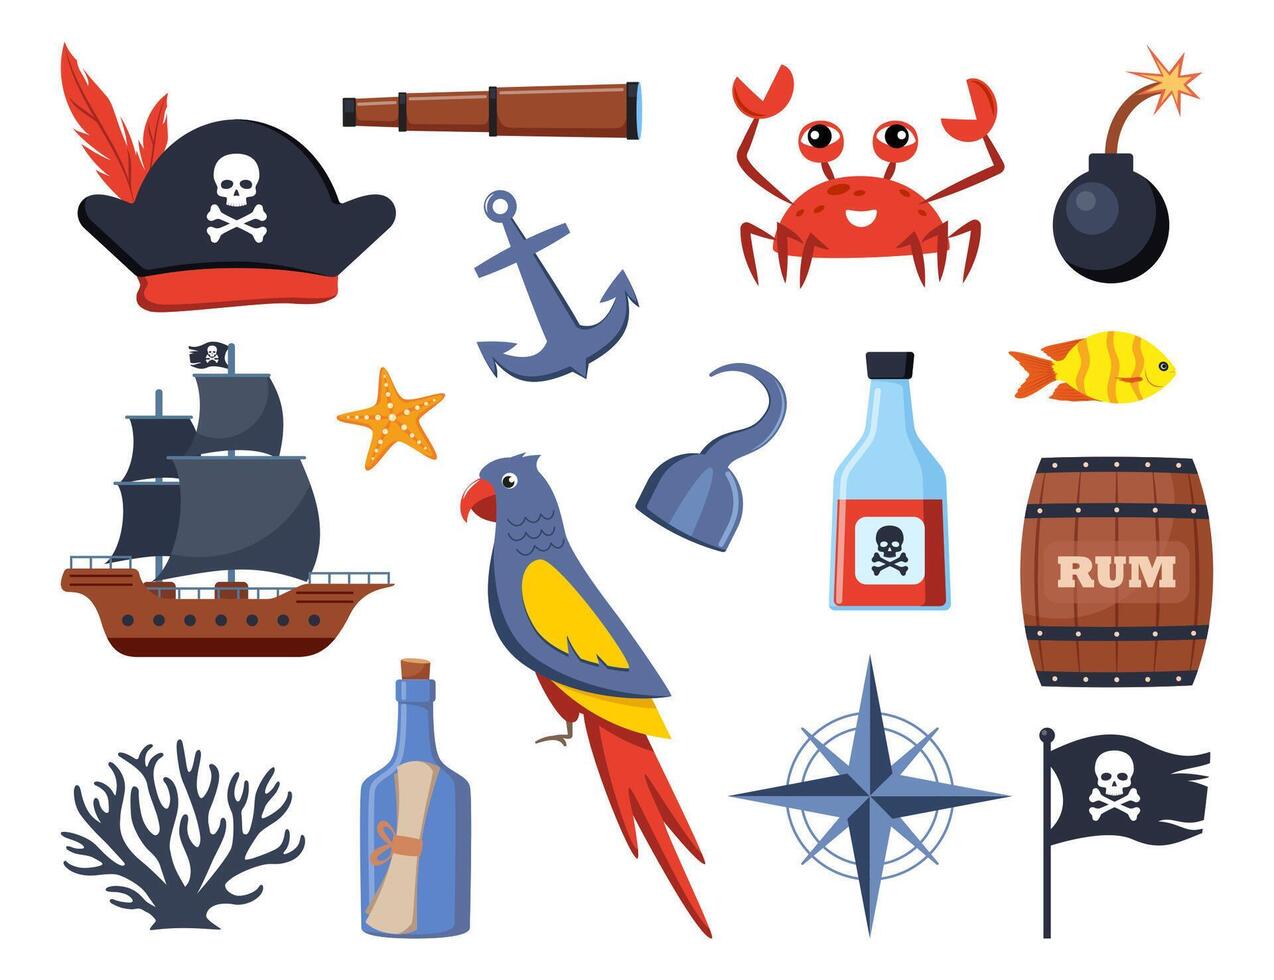 Pirate elements set. Pirates theme illustrations with ship, captain, chest, map, parrot, rum, cannonball. Funny pirate party icons. Vector illustration.